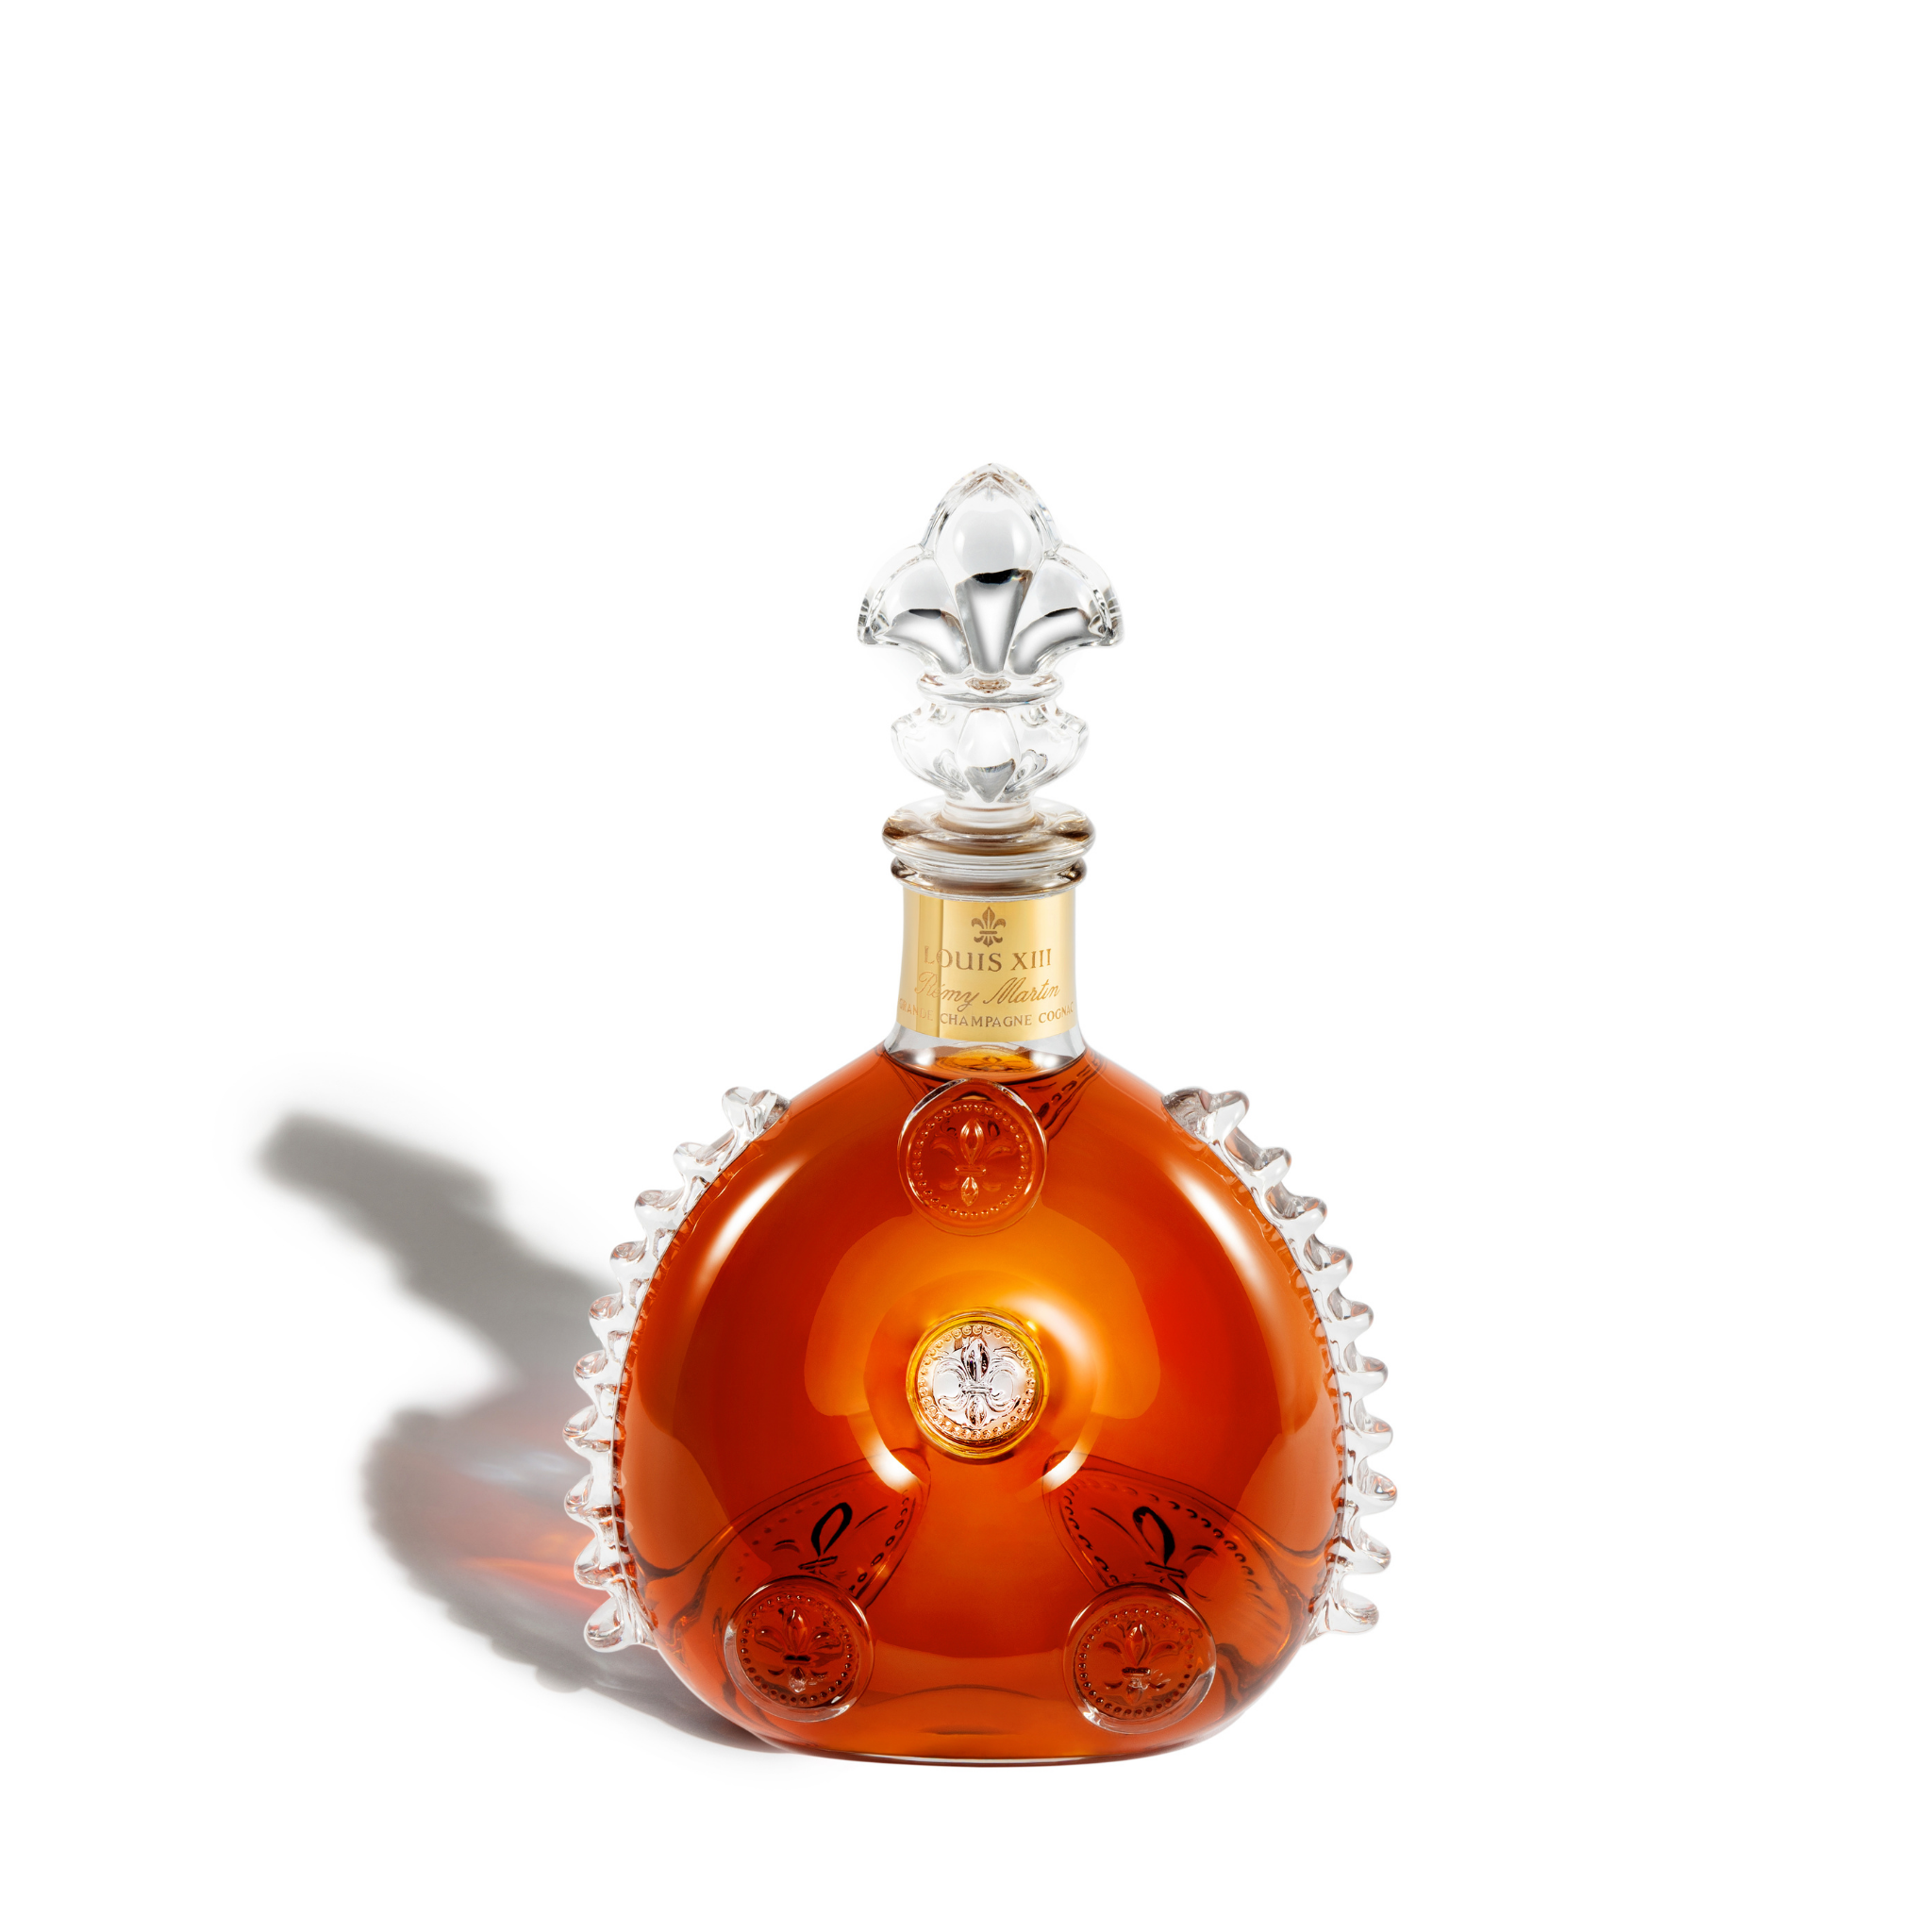 remy martin louis xiii glasses